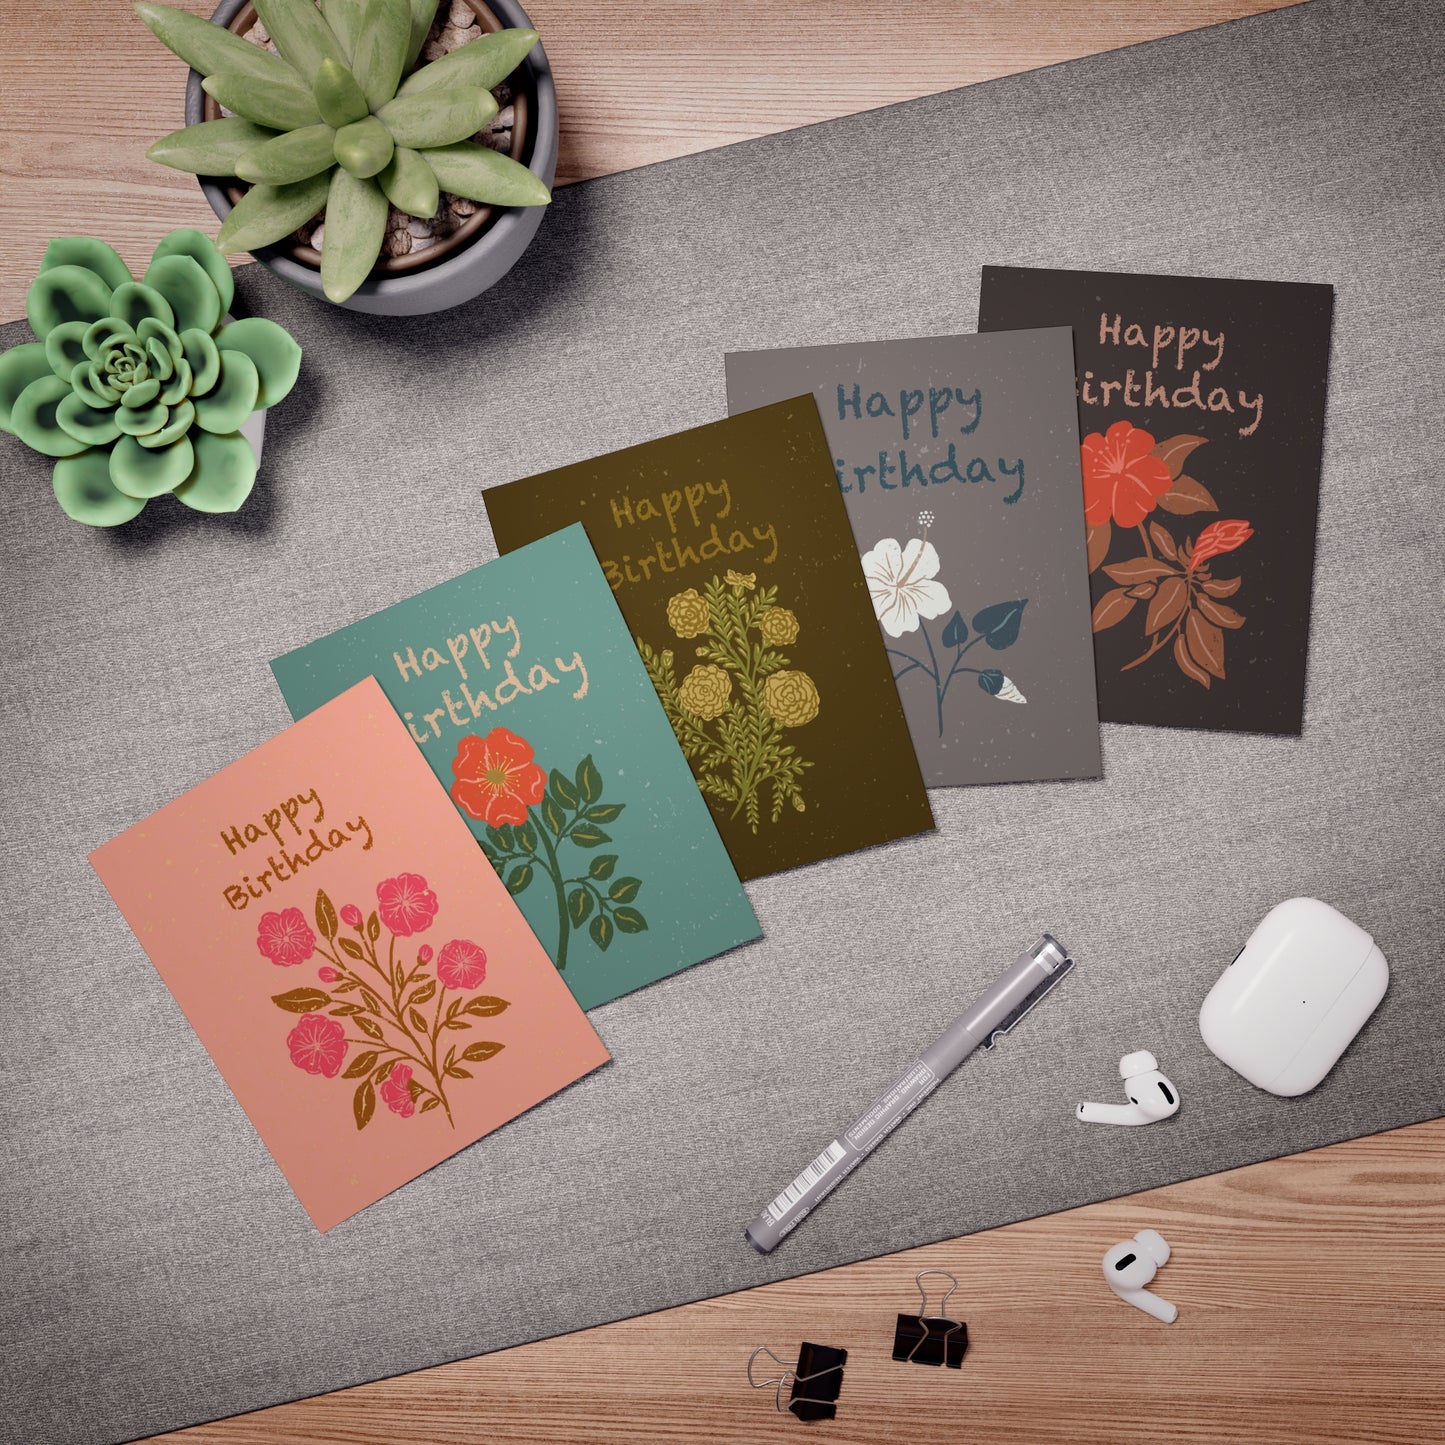 Birthday Cards with Five Different Block Print Style Flower Designs in Retro Colors (5 Pack)